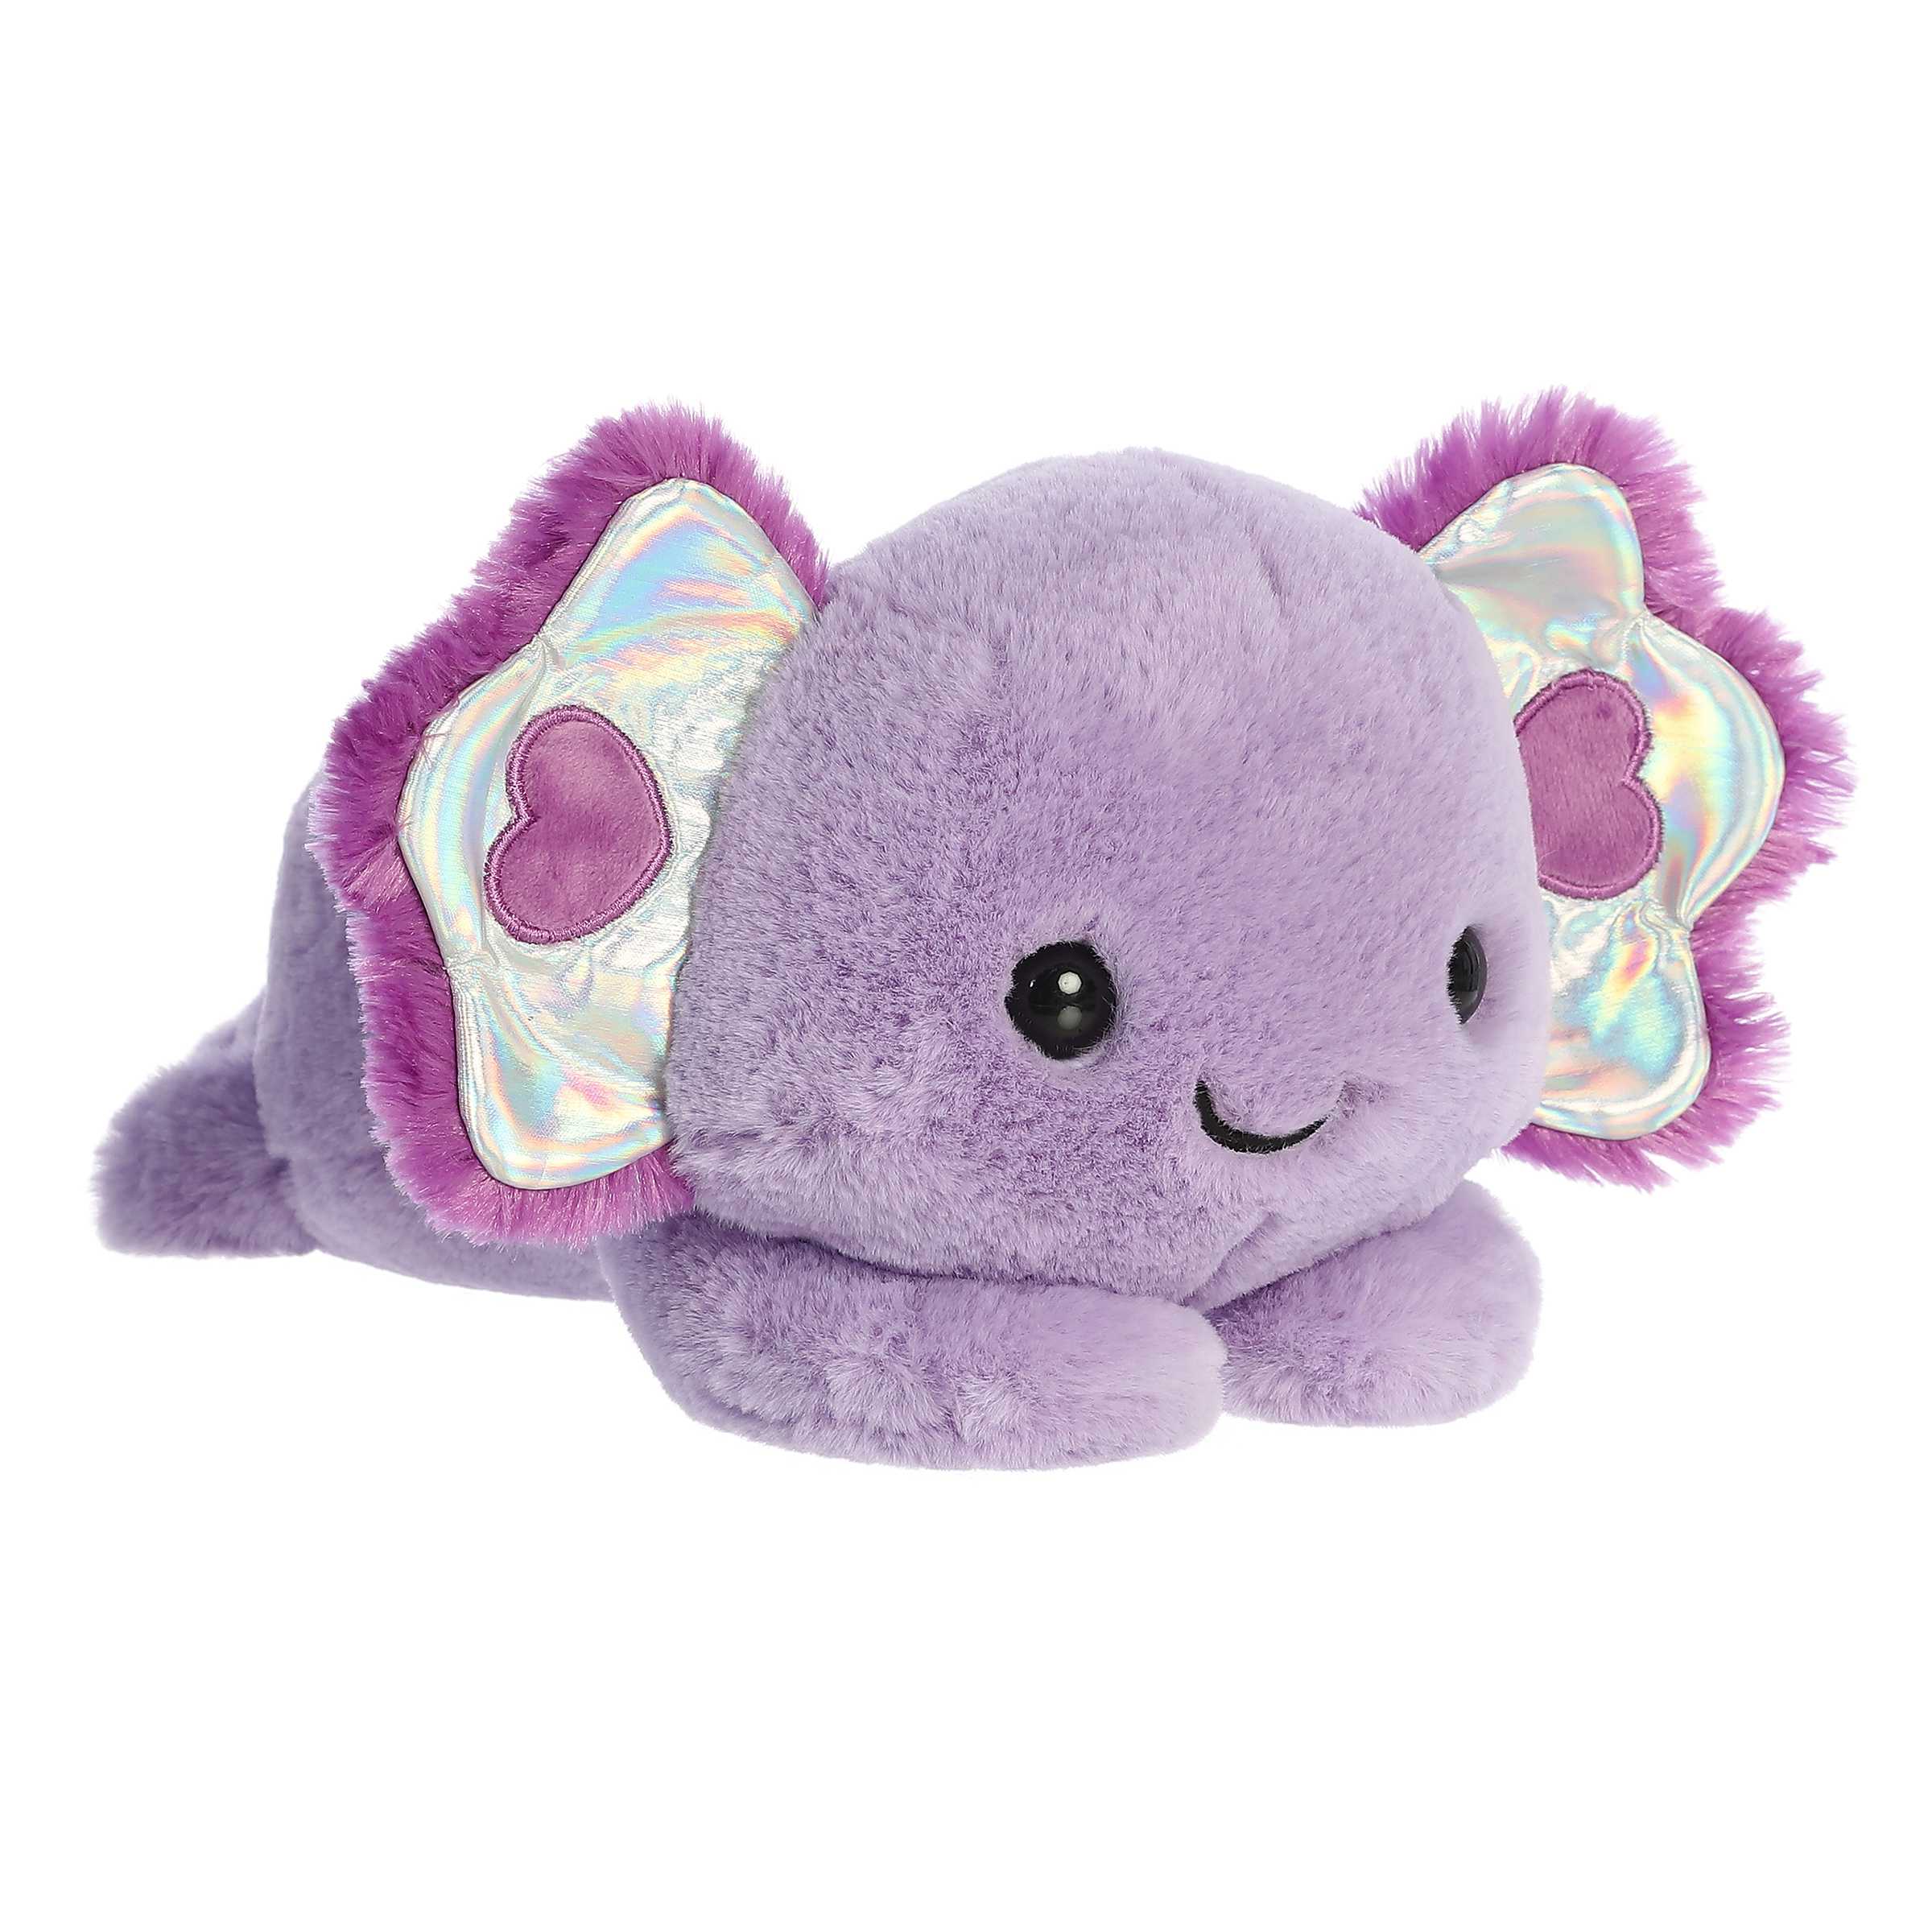 Axolotl plush, boasting rich pruple coat, smiling face, and embroidered heart details, symbolizing joy and affection